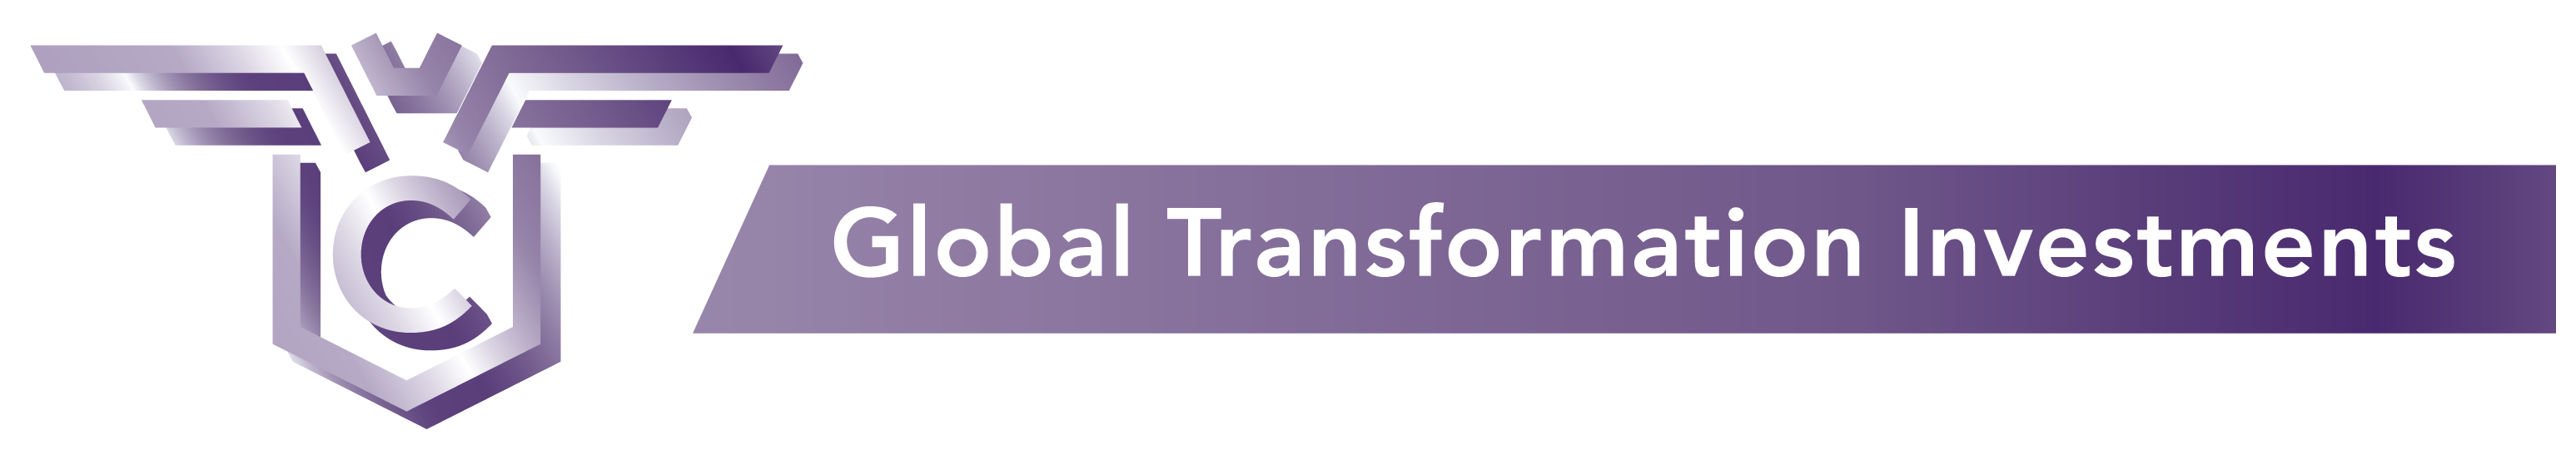 Global Transformation Investments